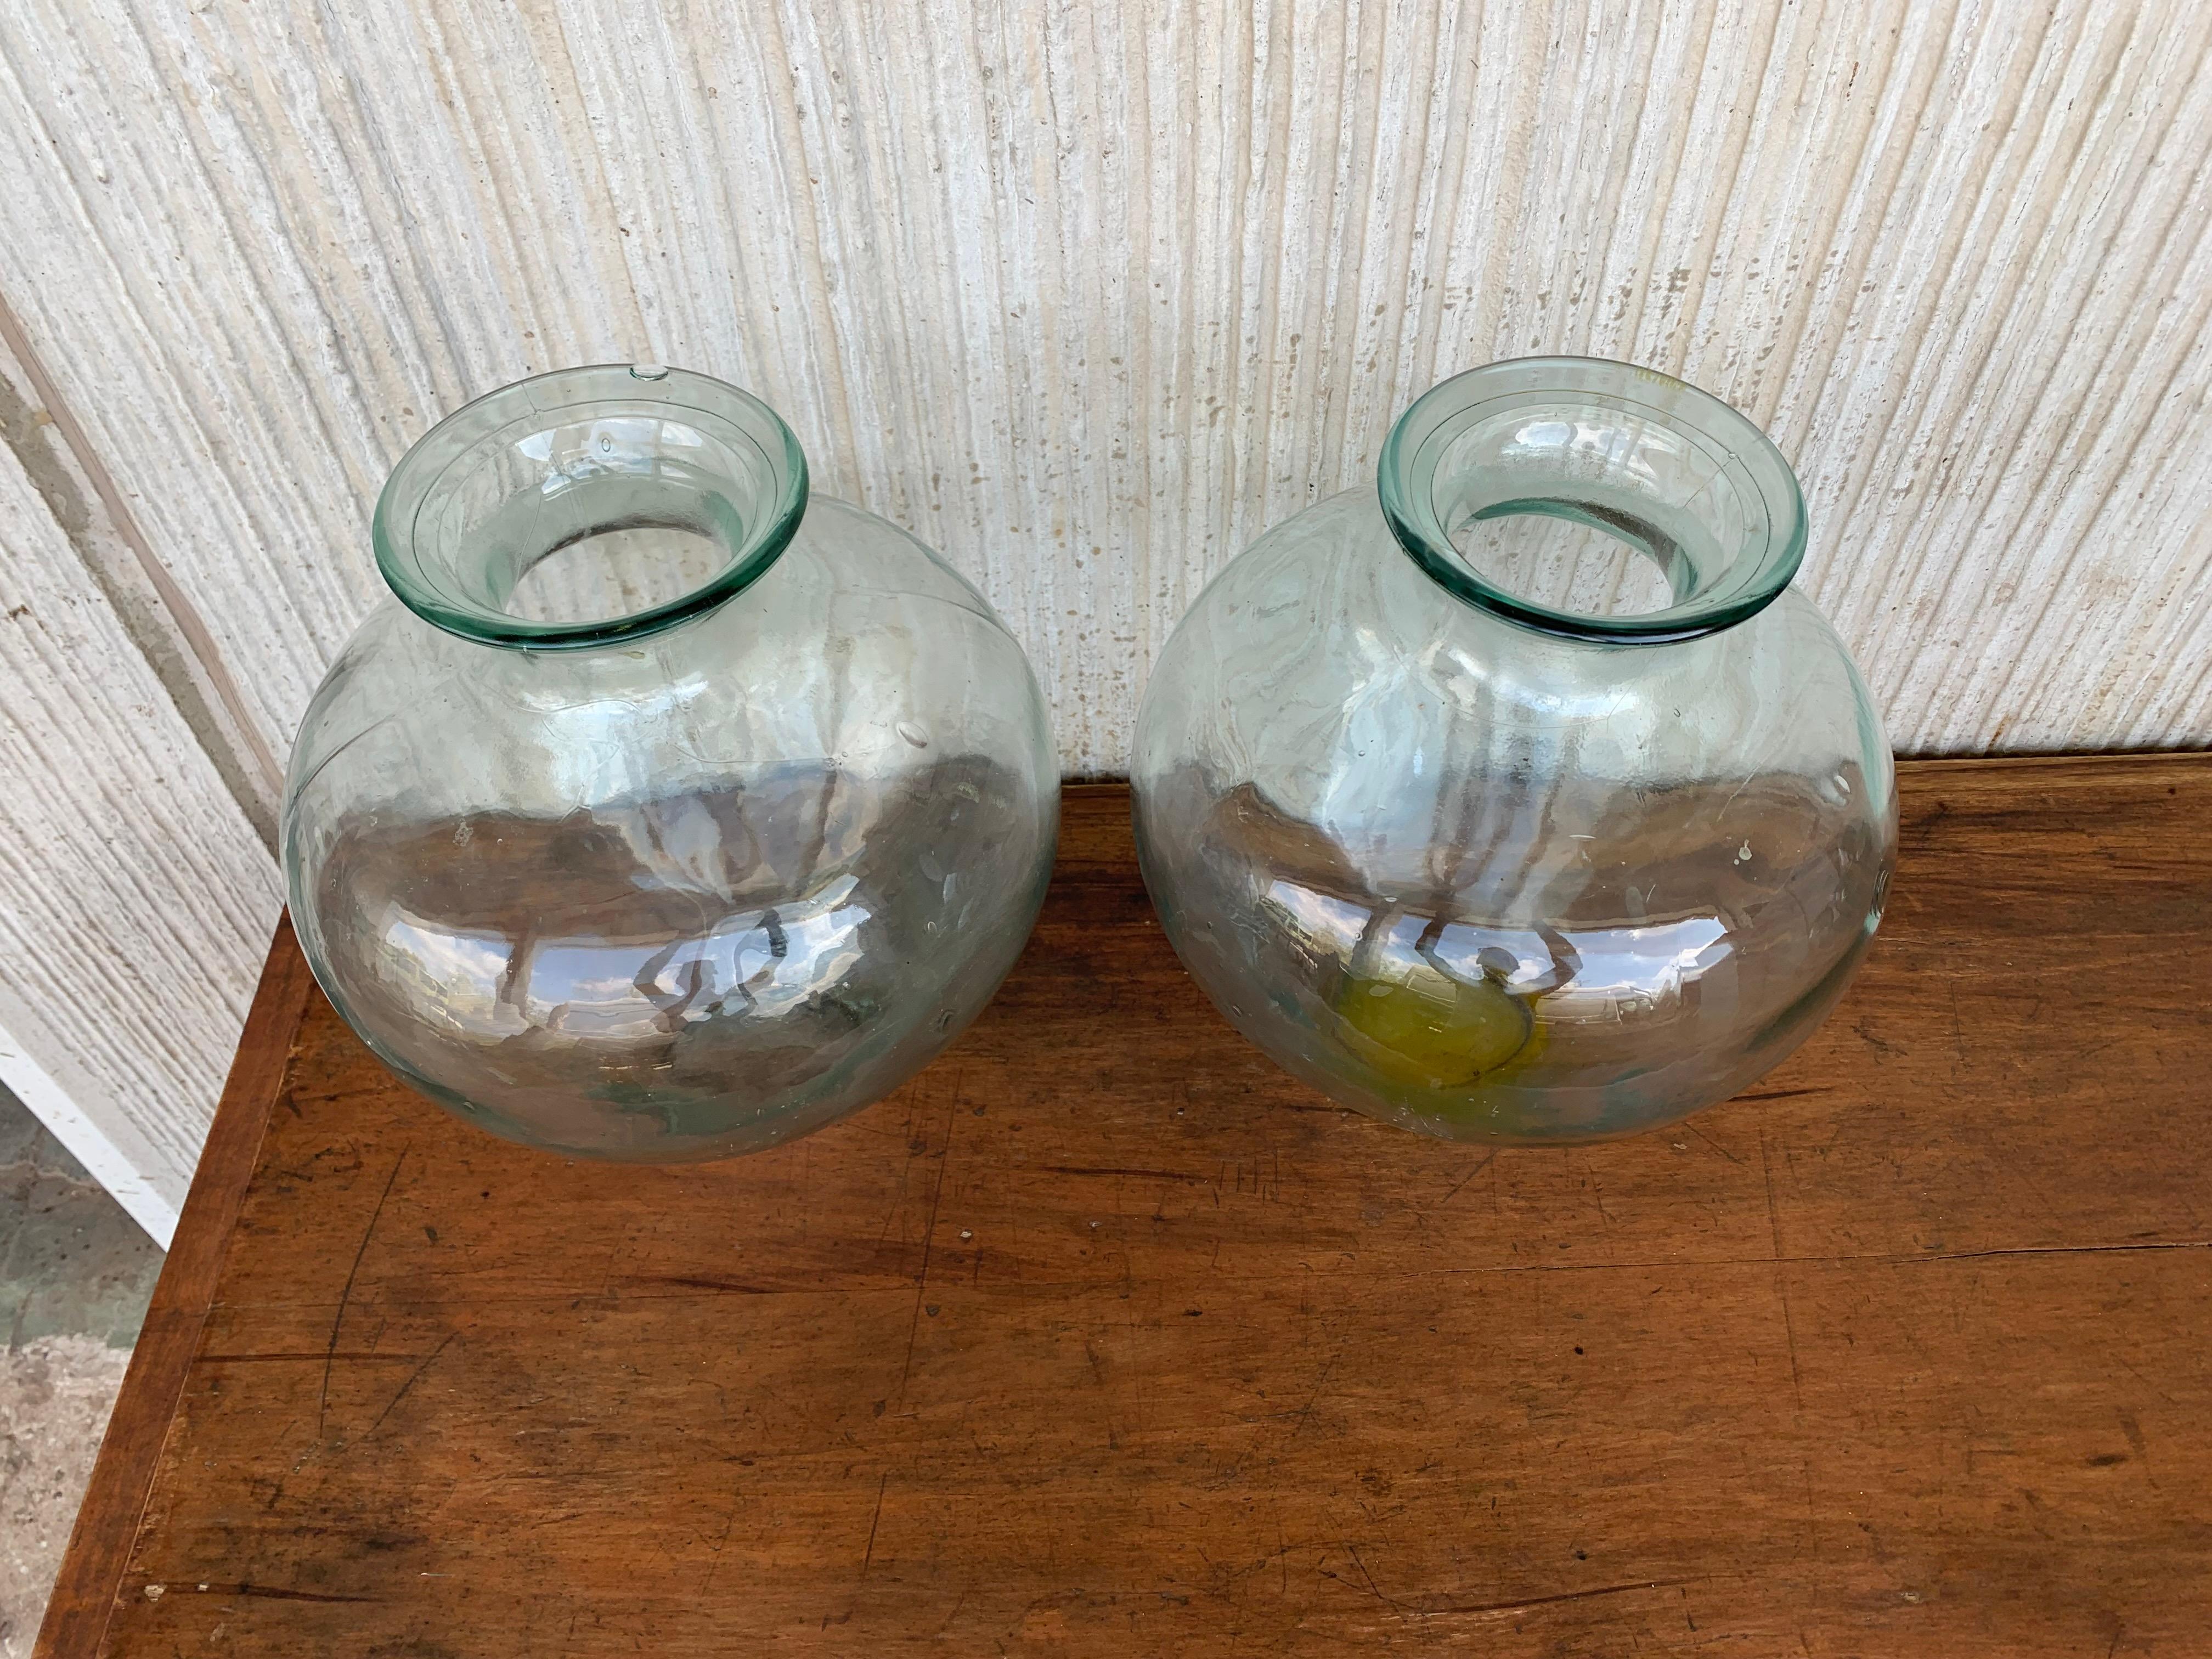 Set of 2 Green Glass French Demijohn Bottles with Woven Esparto Basket For Sale 3